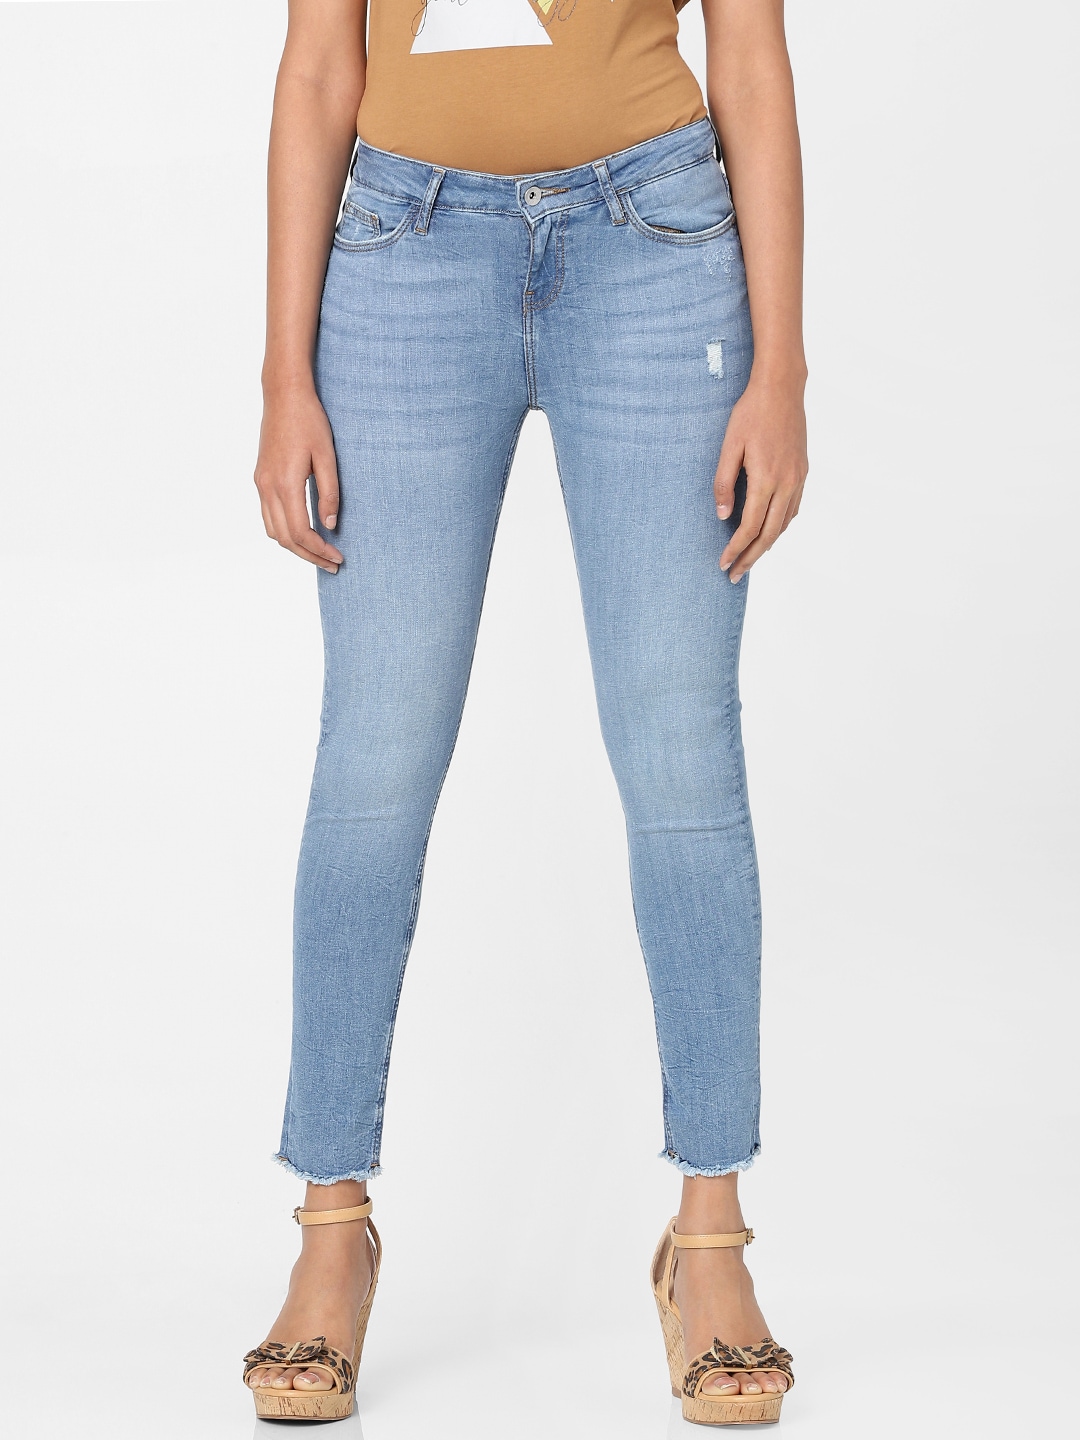 Vero Moda Women Blue Skinny Fit Low Distress Light Fade Stretchable Jeans Price in India